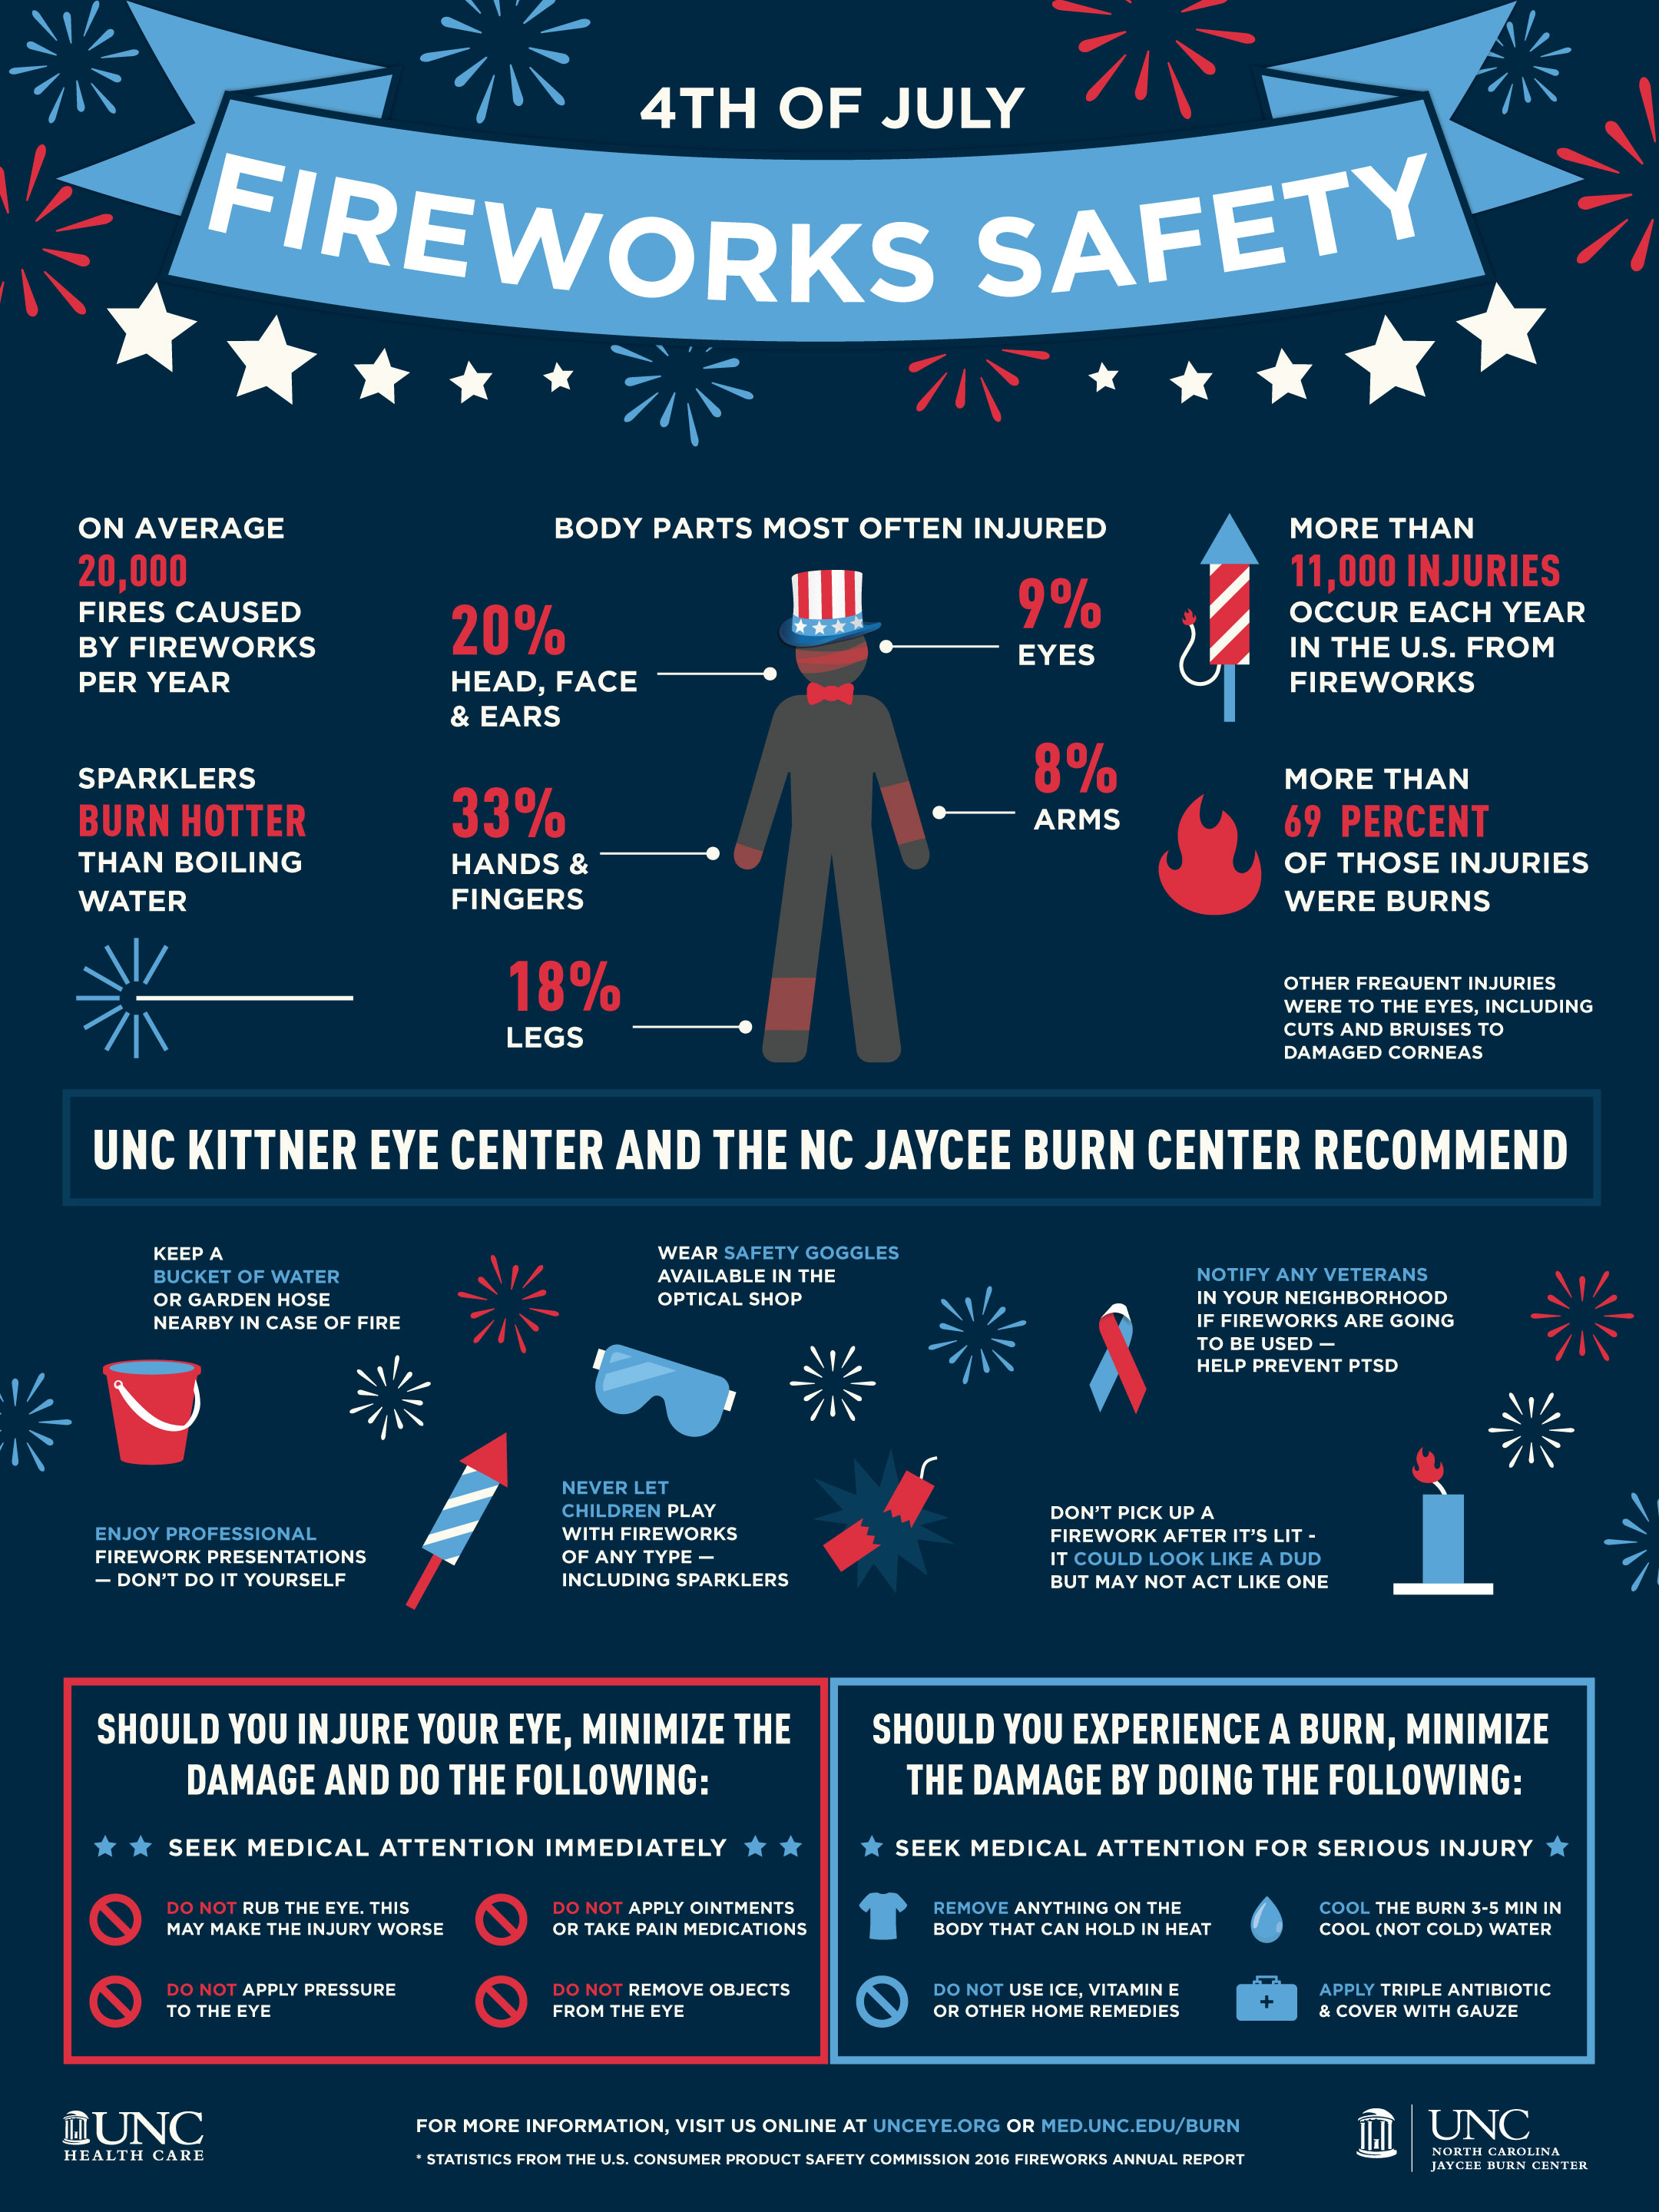 4th of July Fireworks Safety Infographic